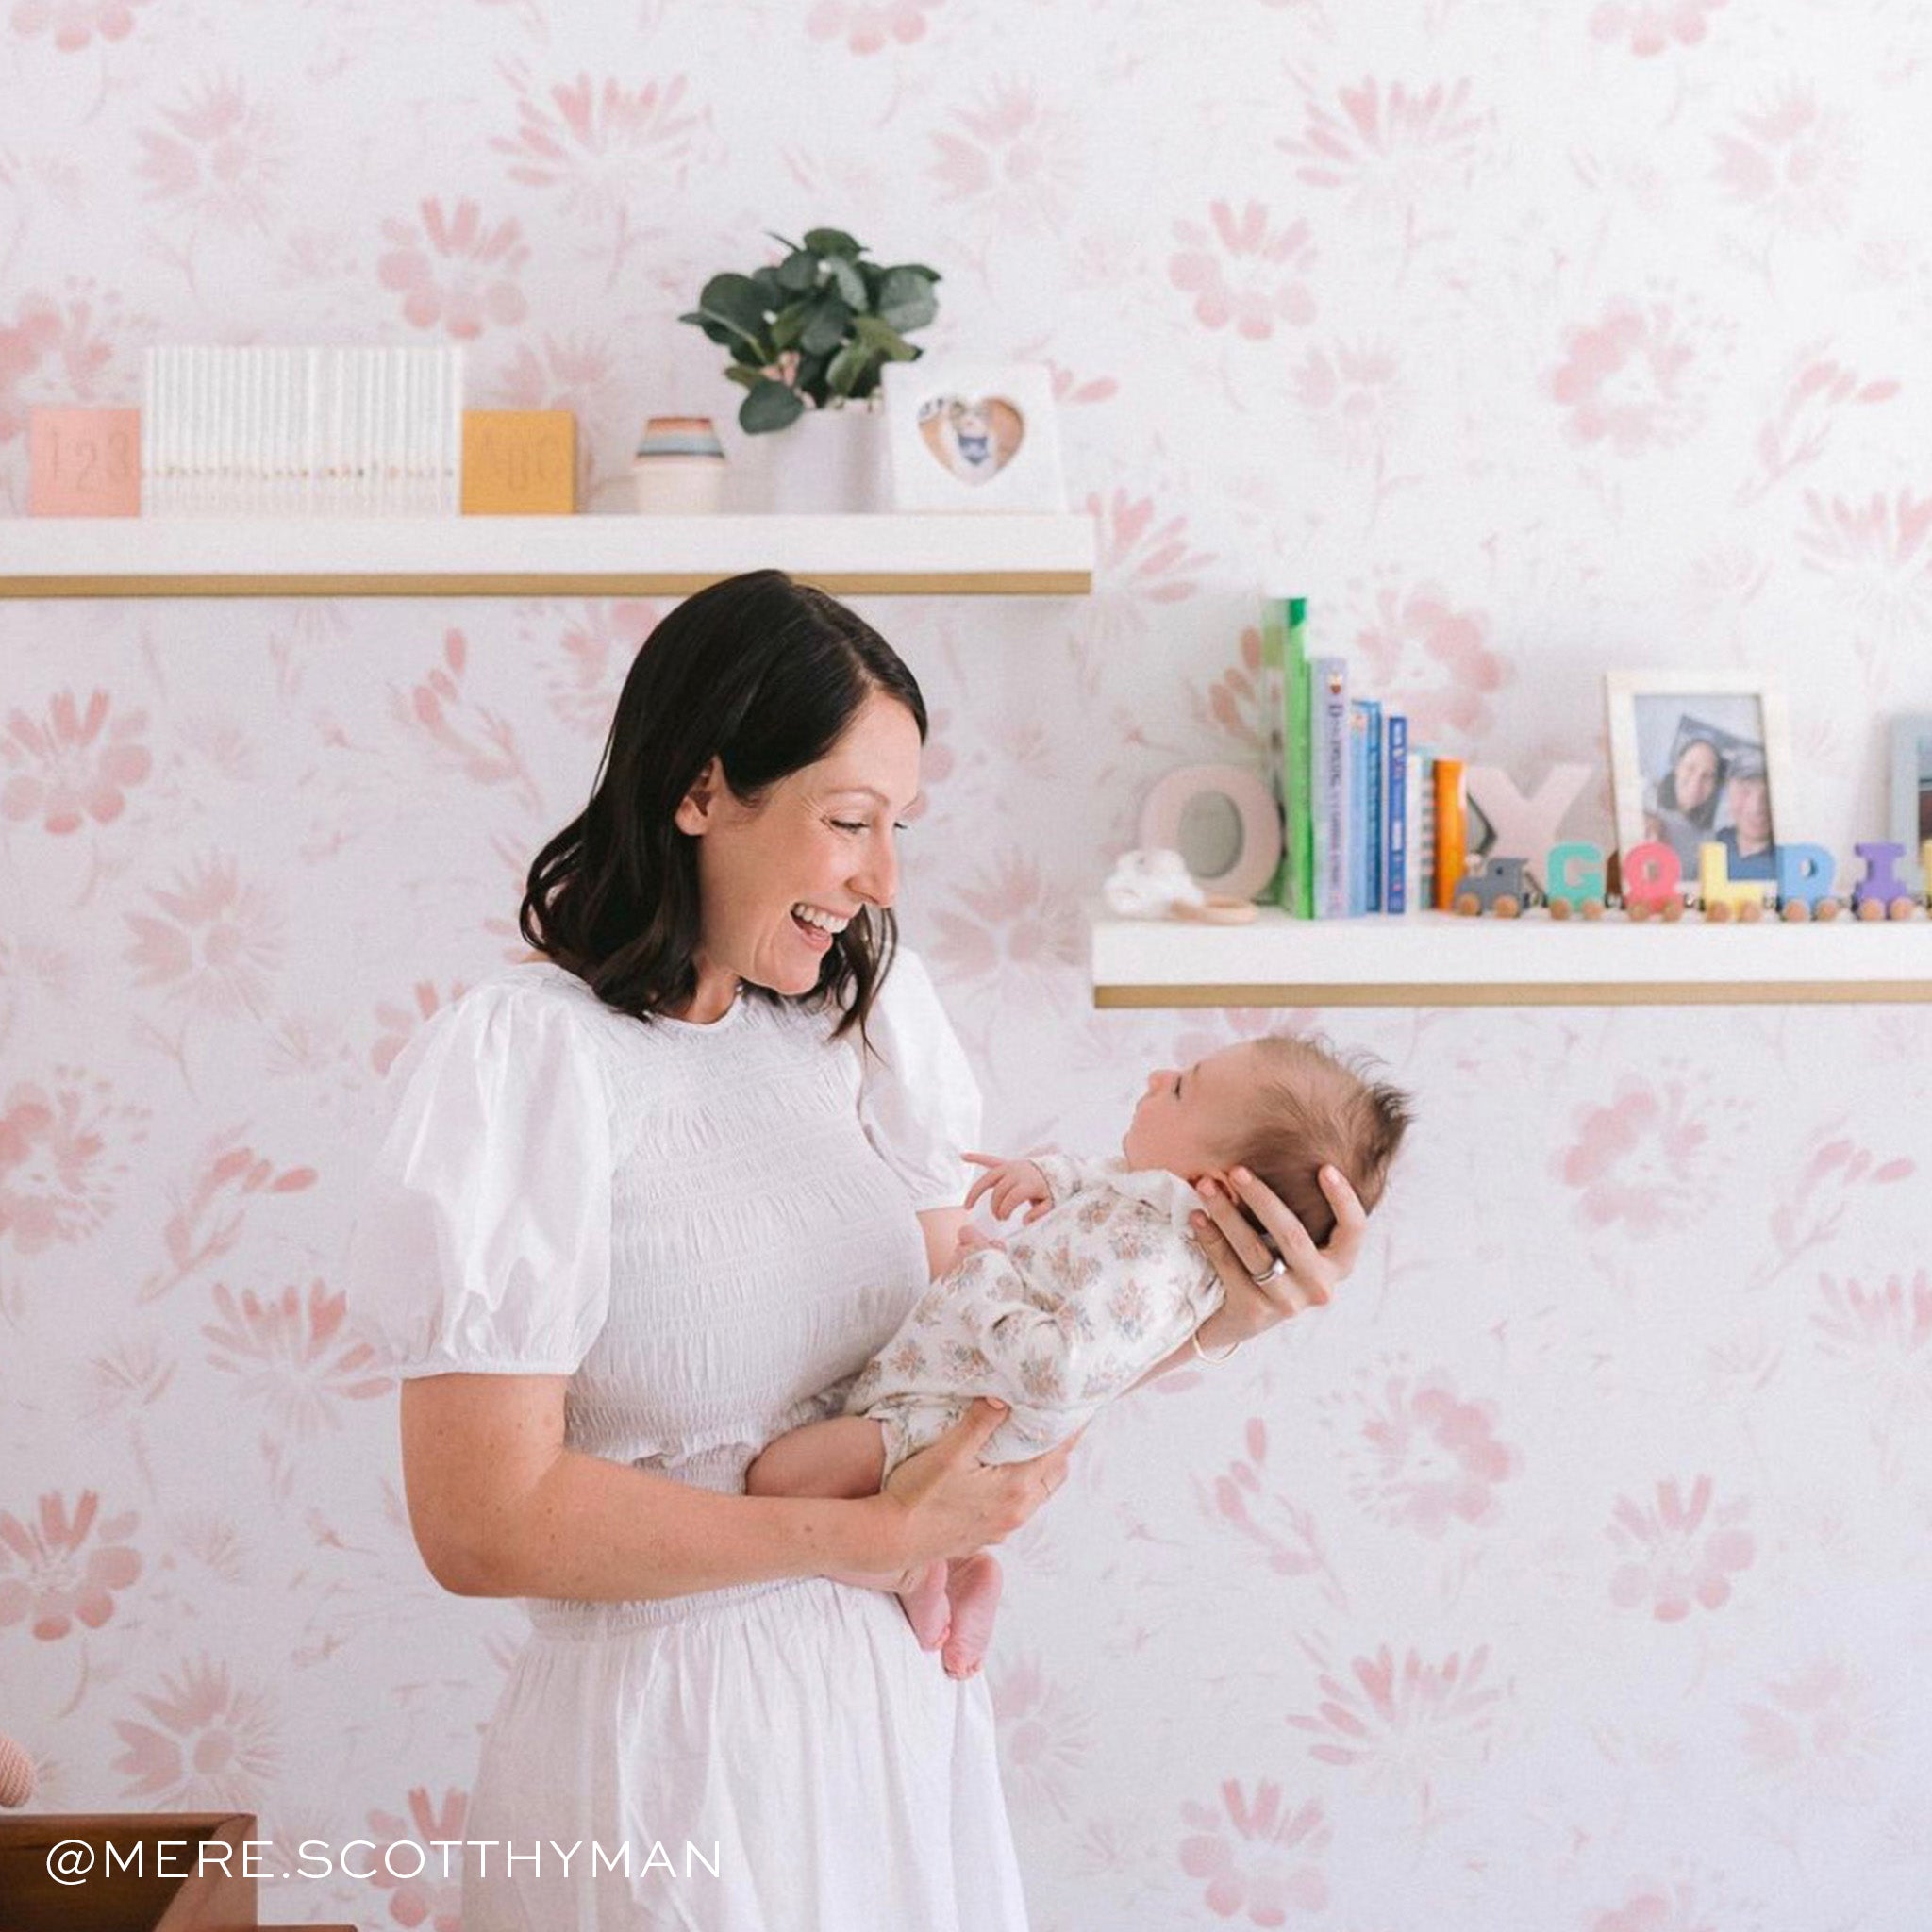 Pink Floral Wallpaper on nursery room with two shelves and mother holding her baby while smiling